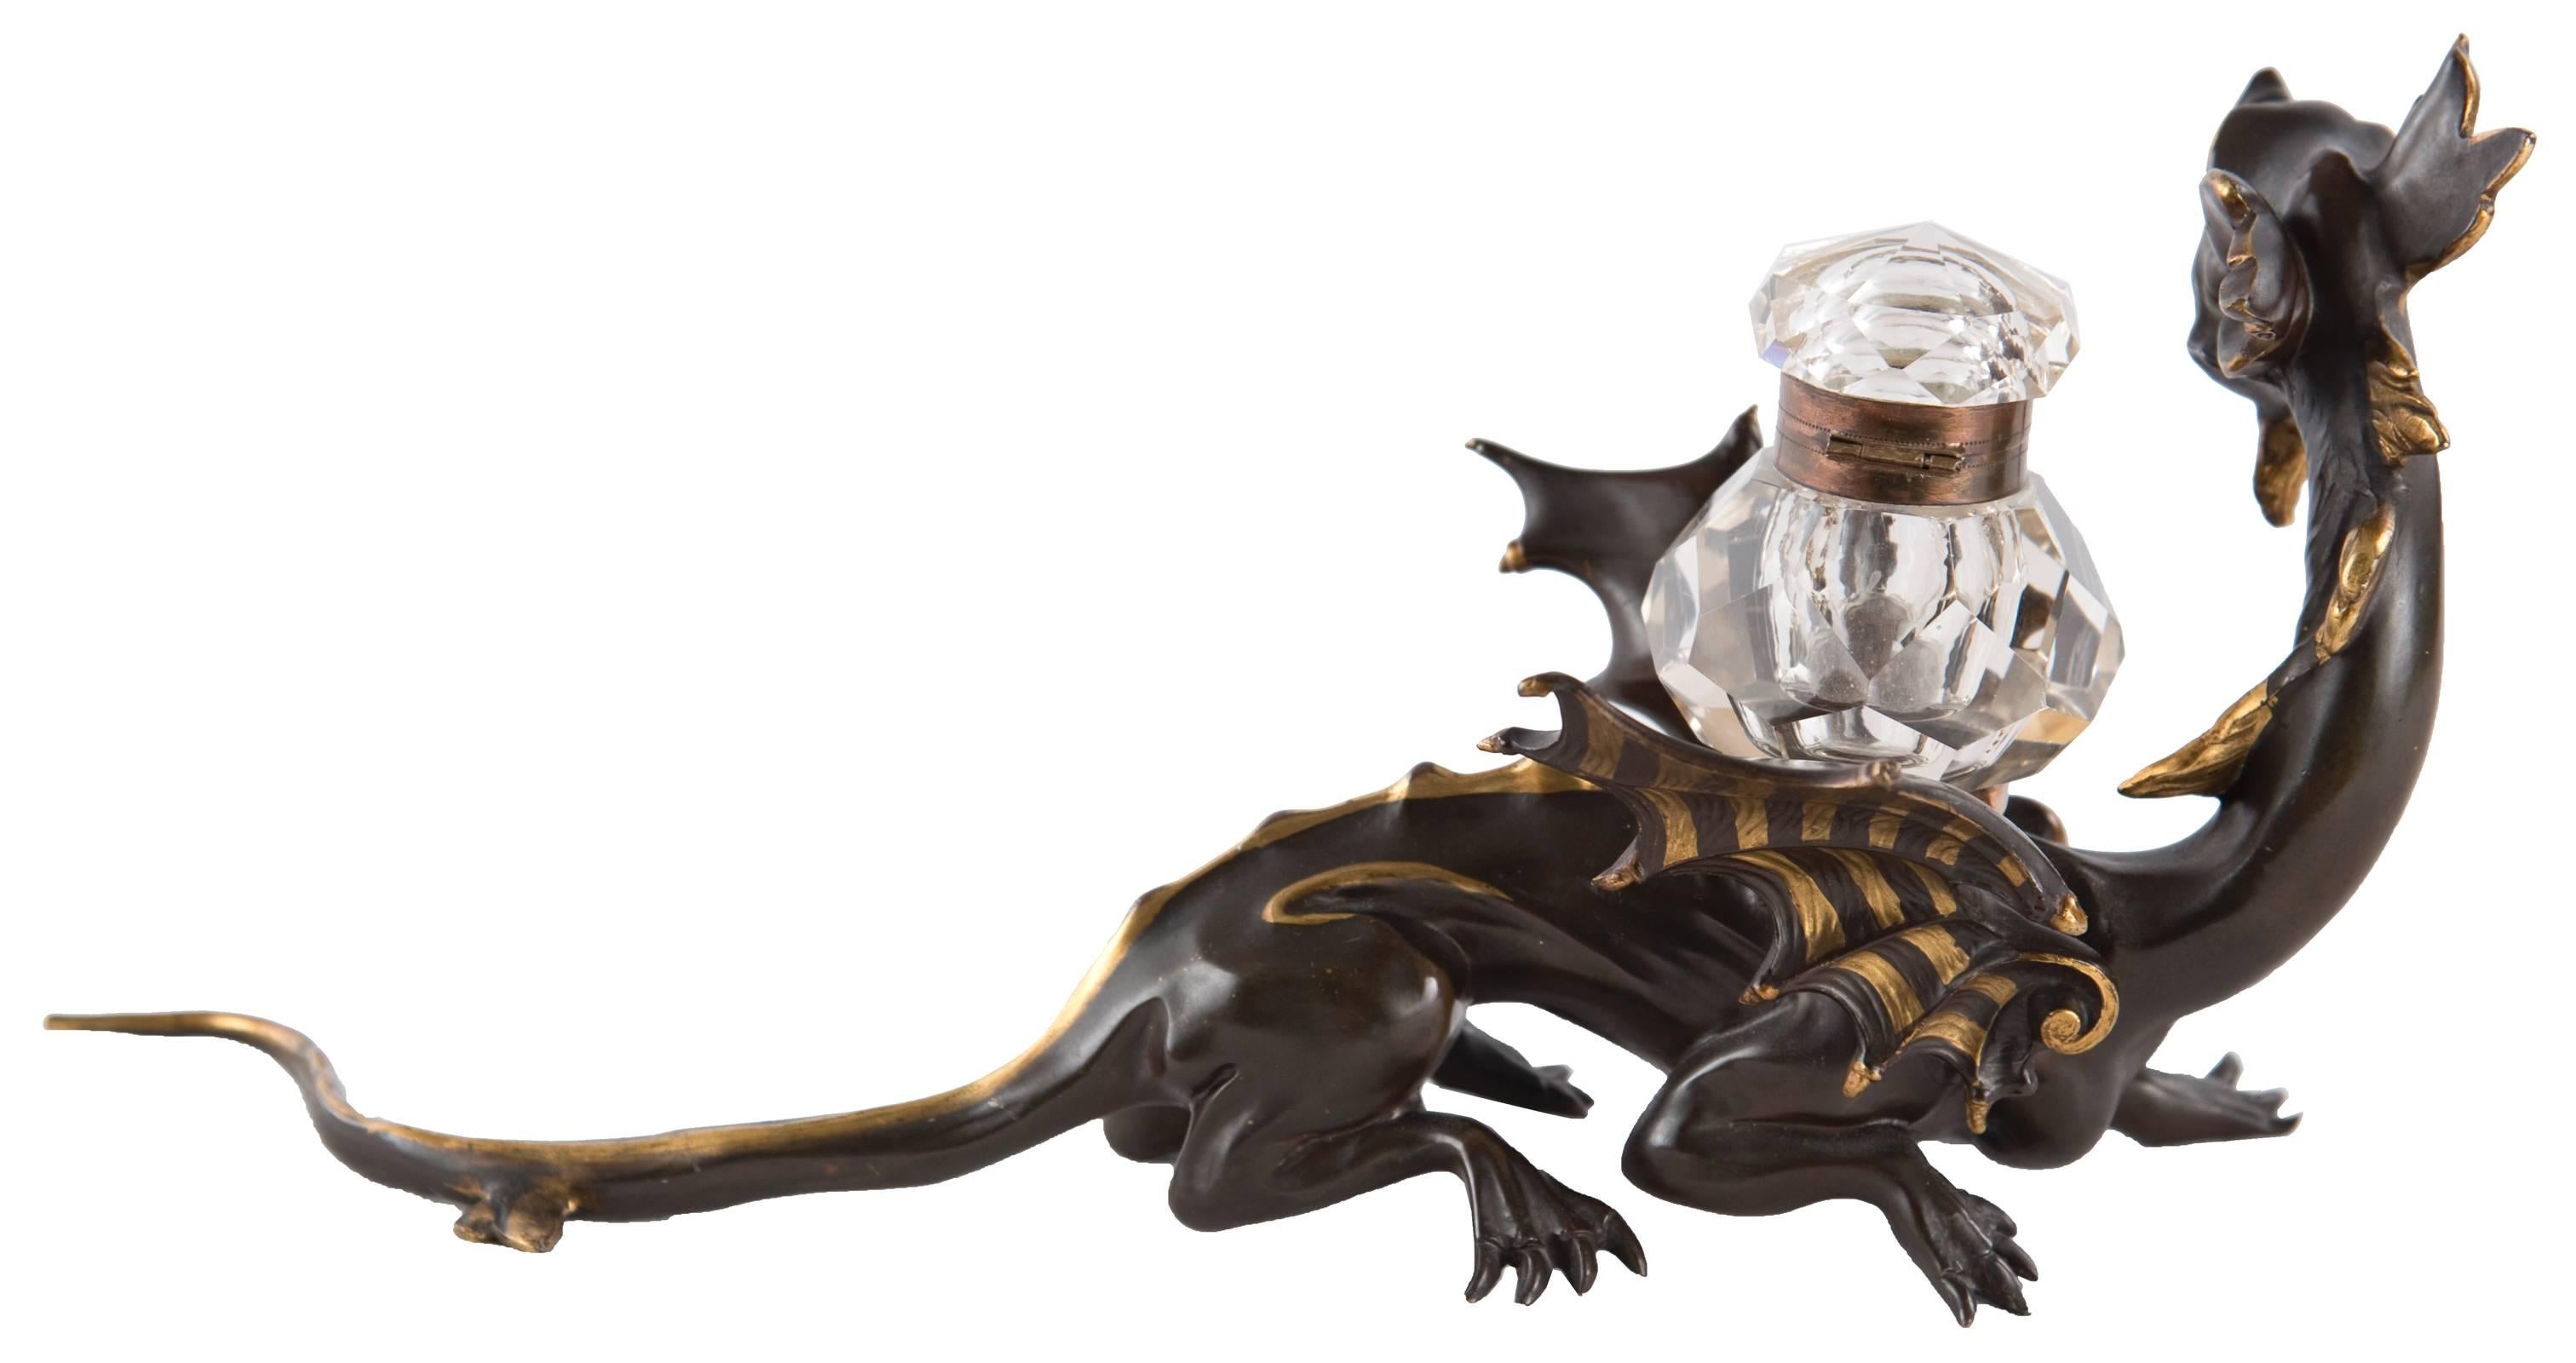 A crystal and brass inkwell with a hinged lid sits on the back of a bronze dragon, which is painted with gold accents. 